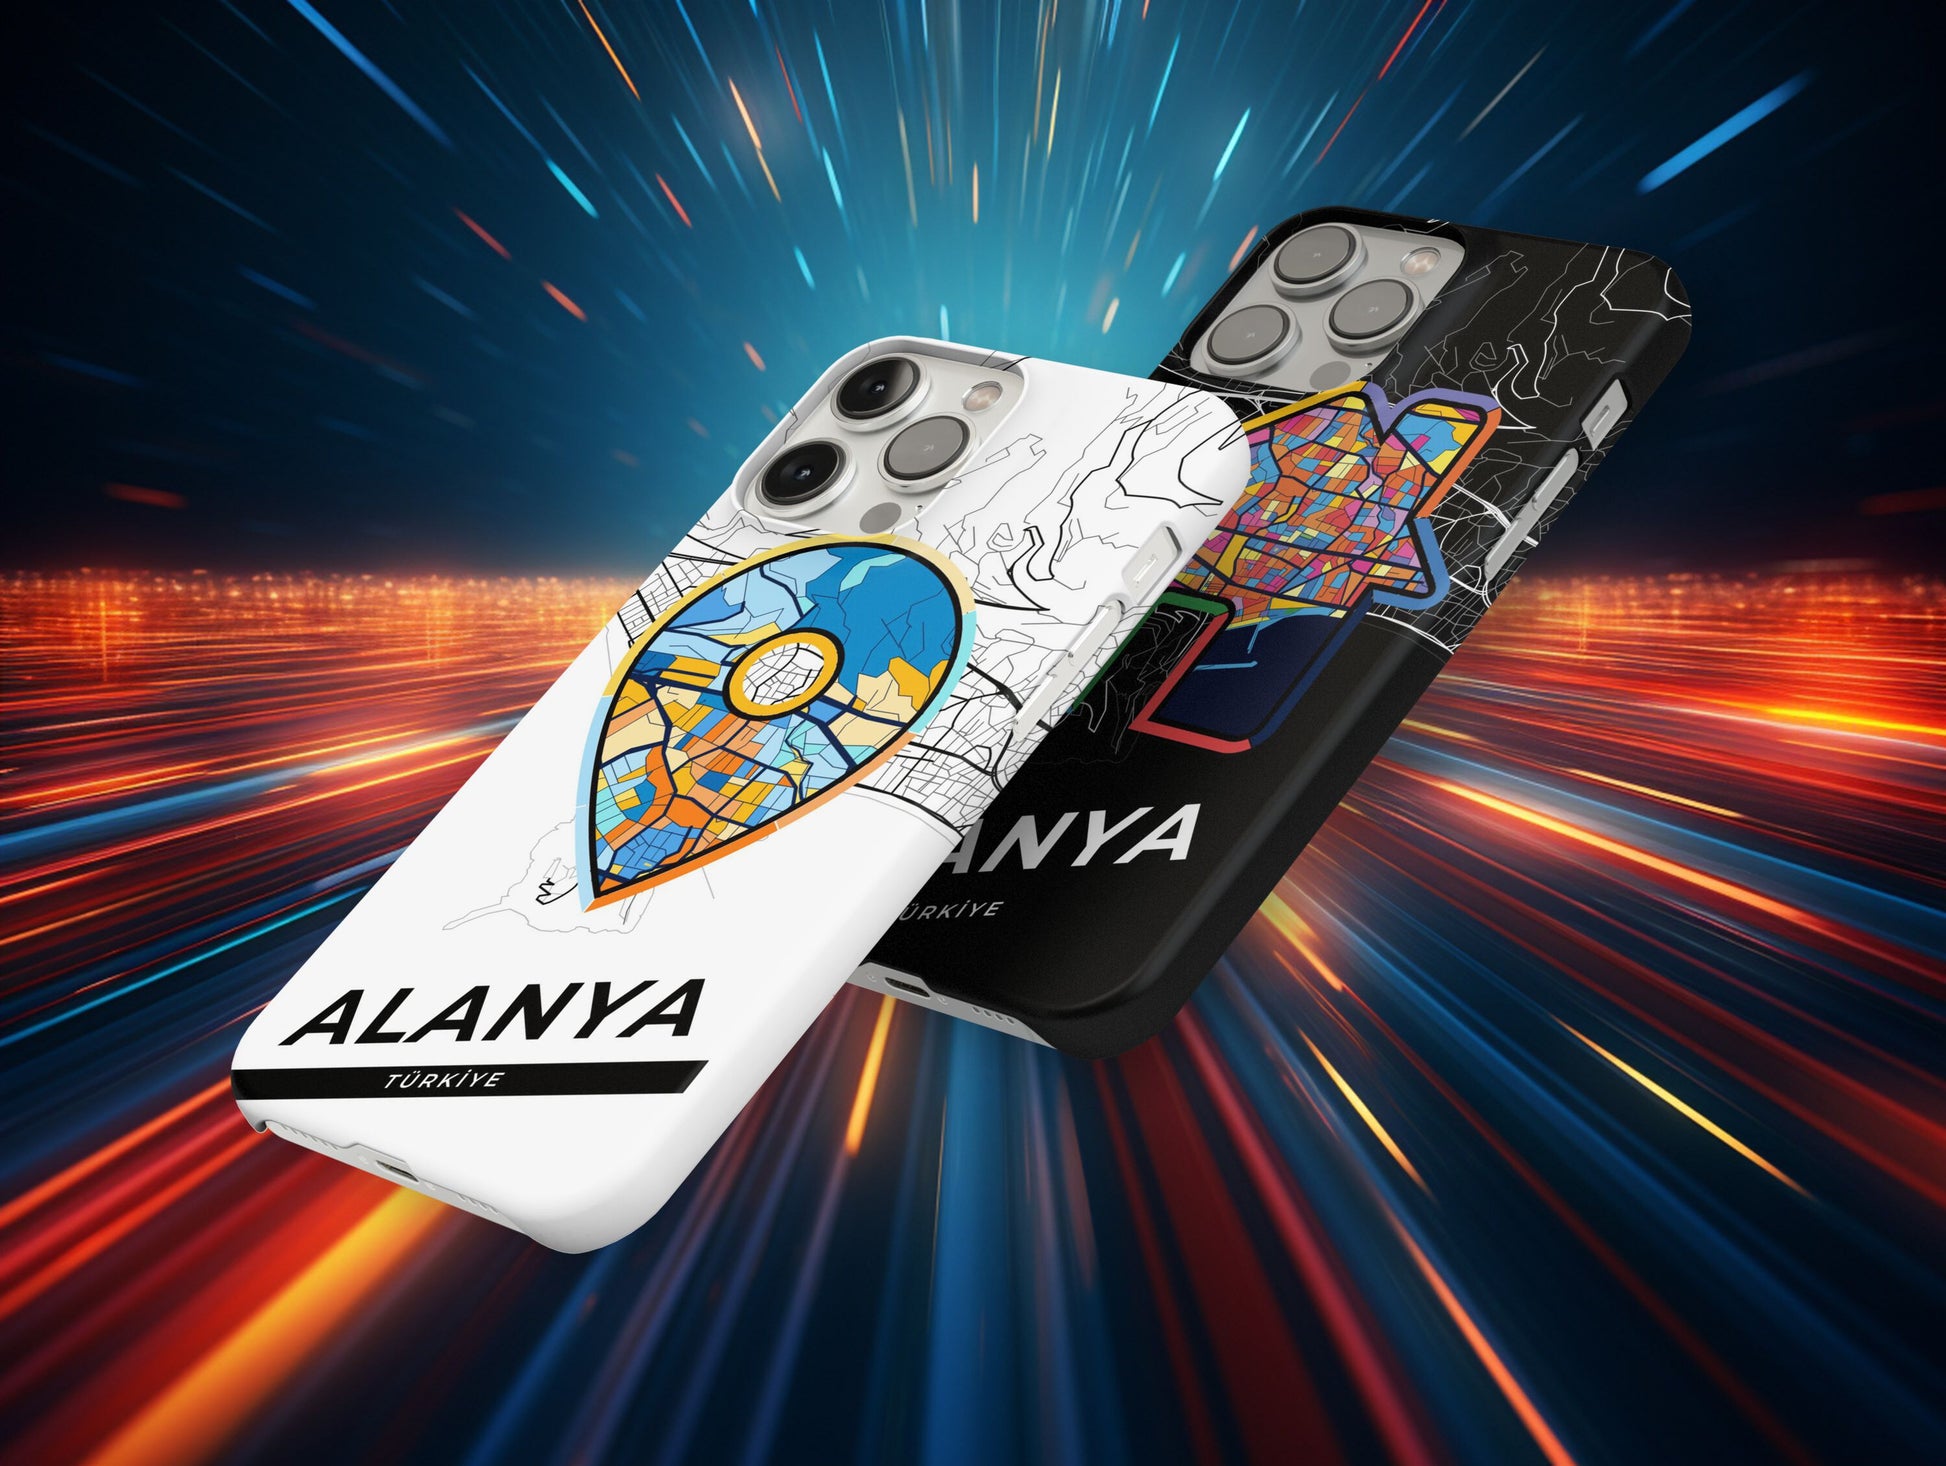 Alanya Turkey slim phone case with colorful icon. Birthday, wedding or housewarming gift. Couple match cases.